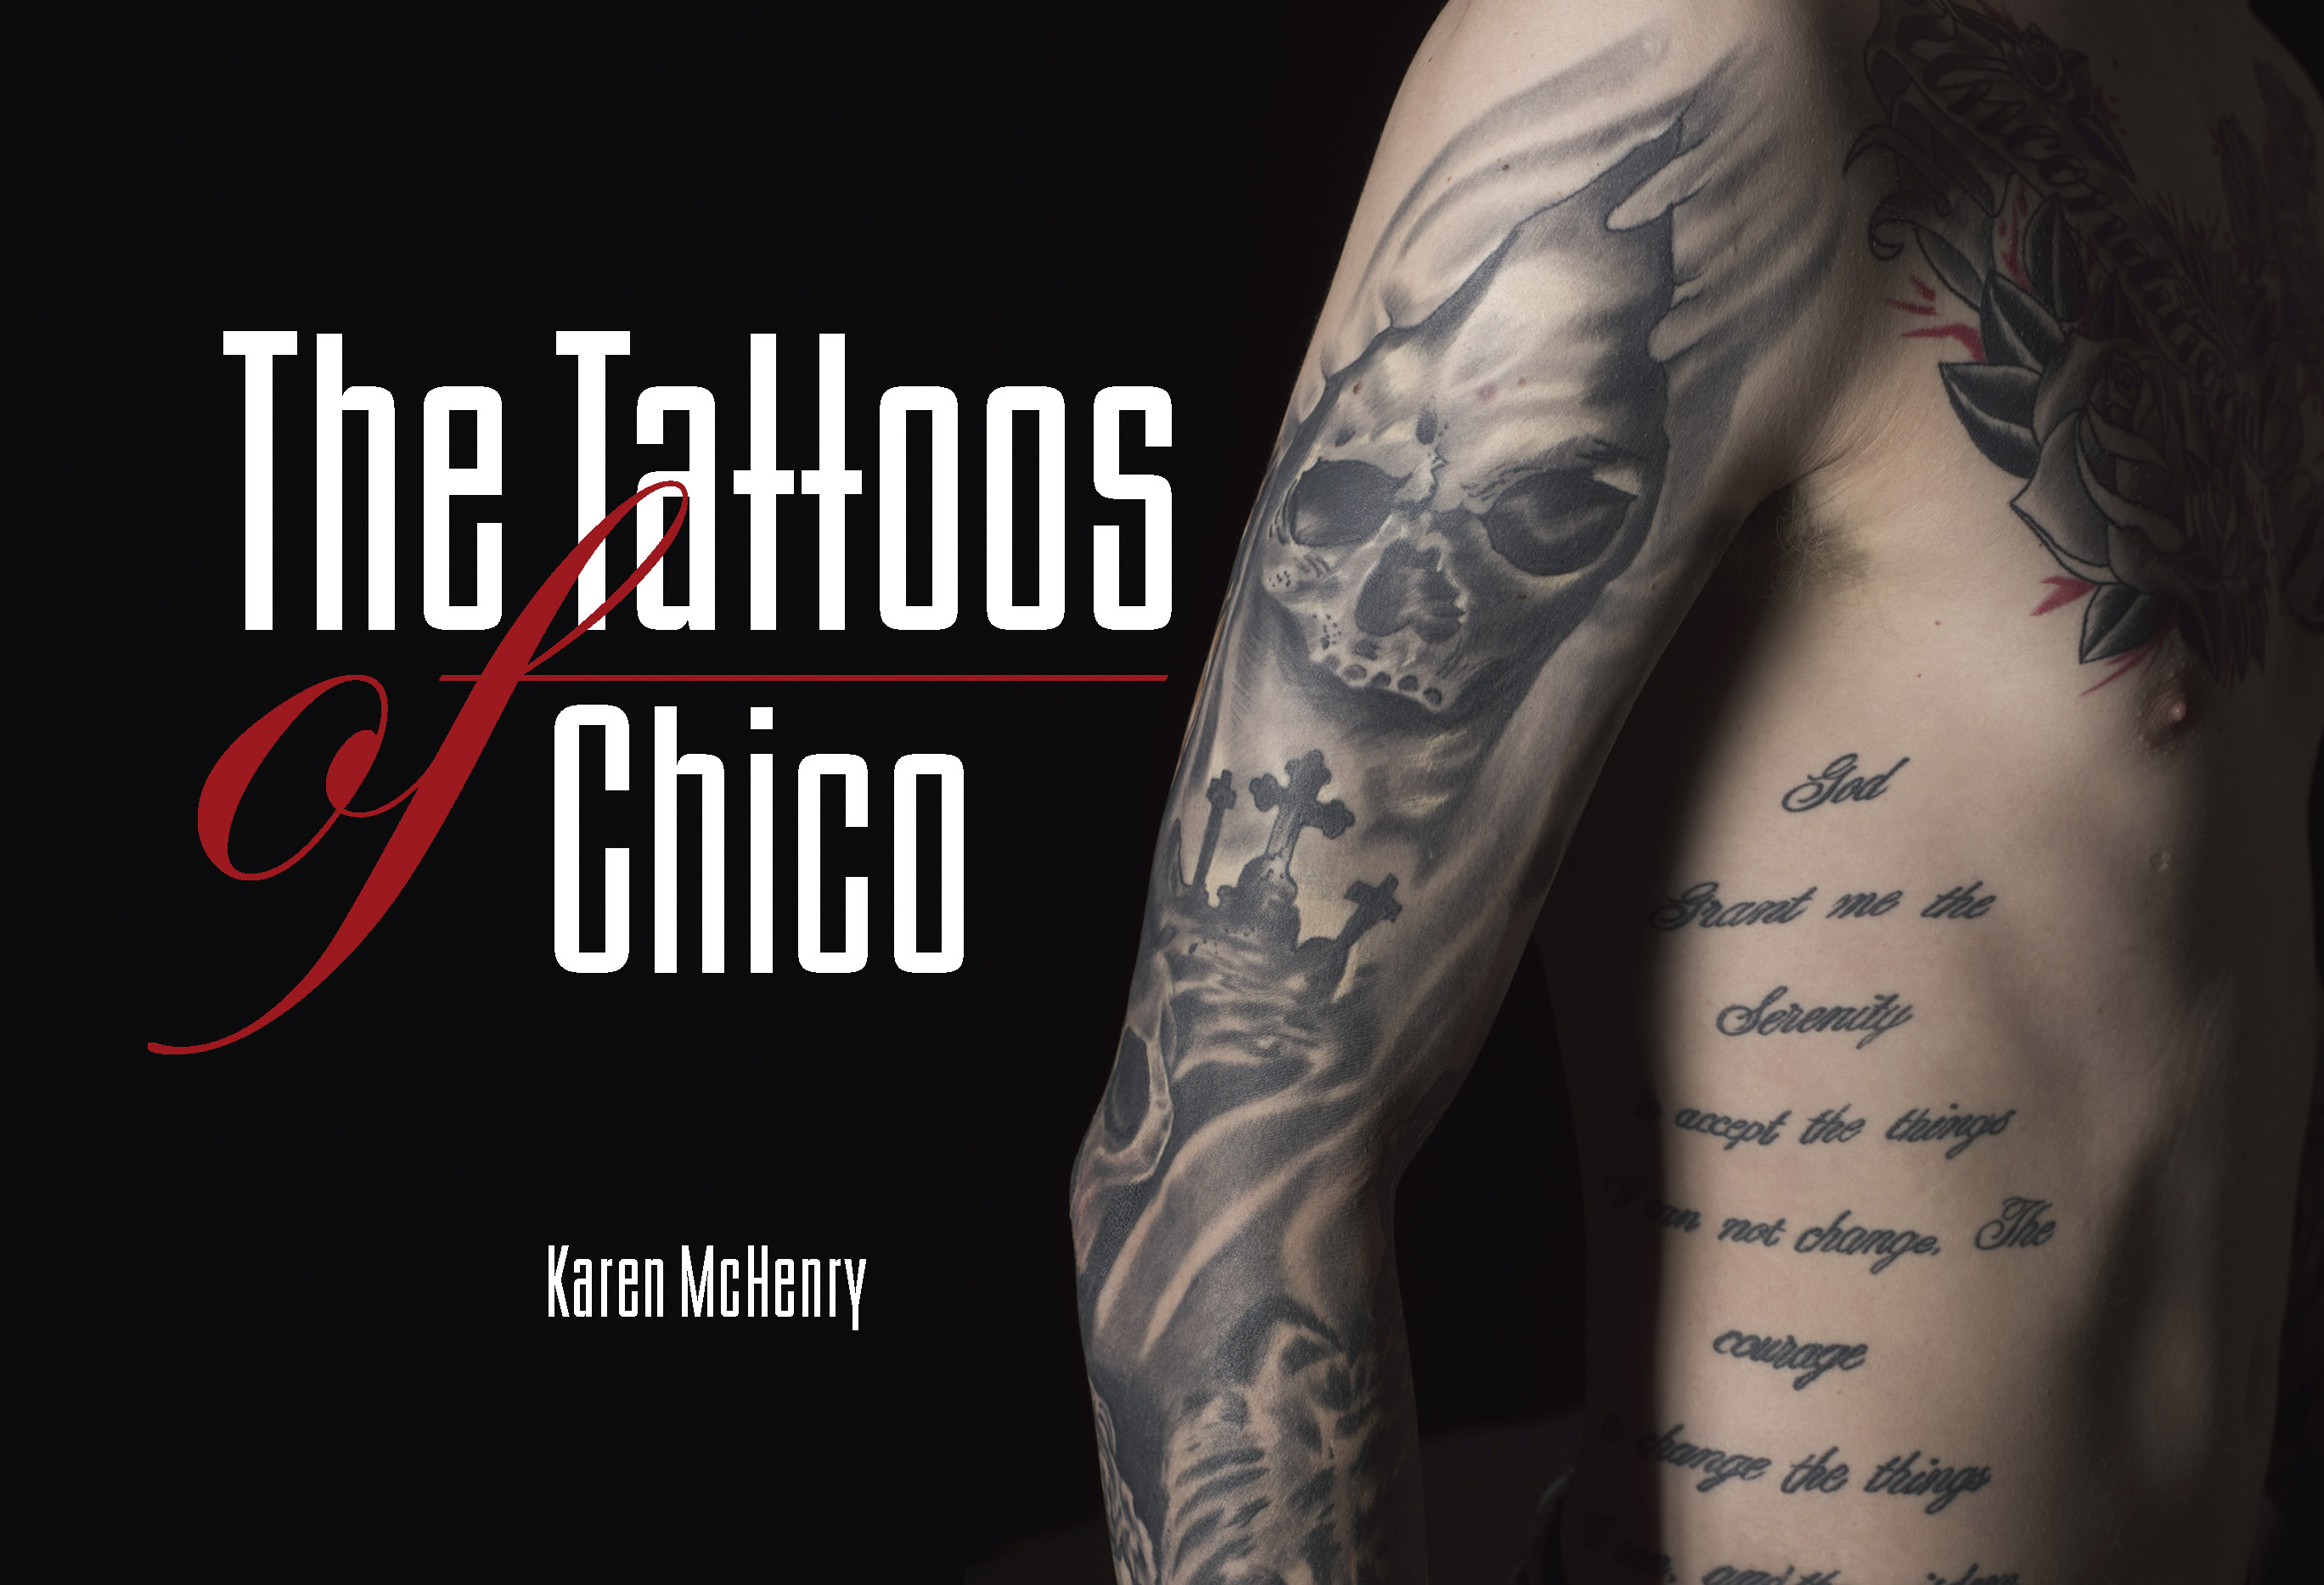 The Tattoos of Chico by Karen McHenry